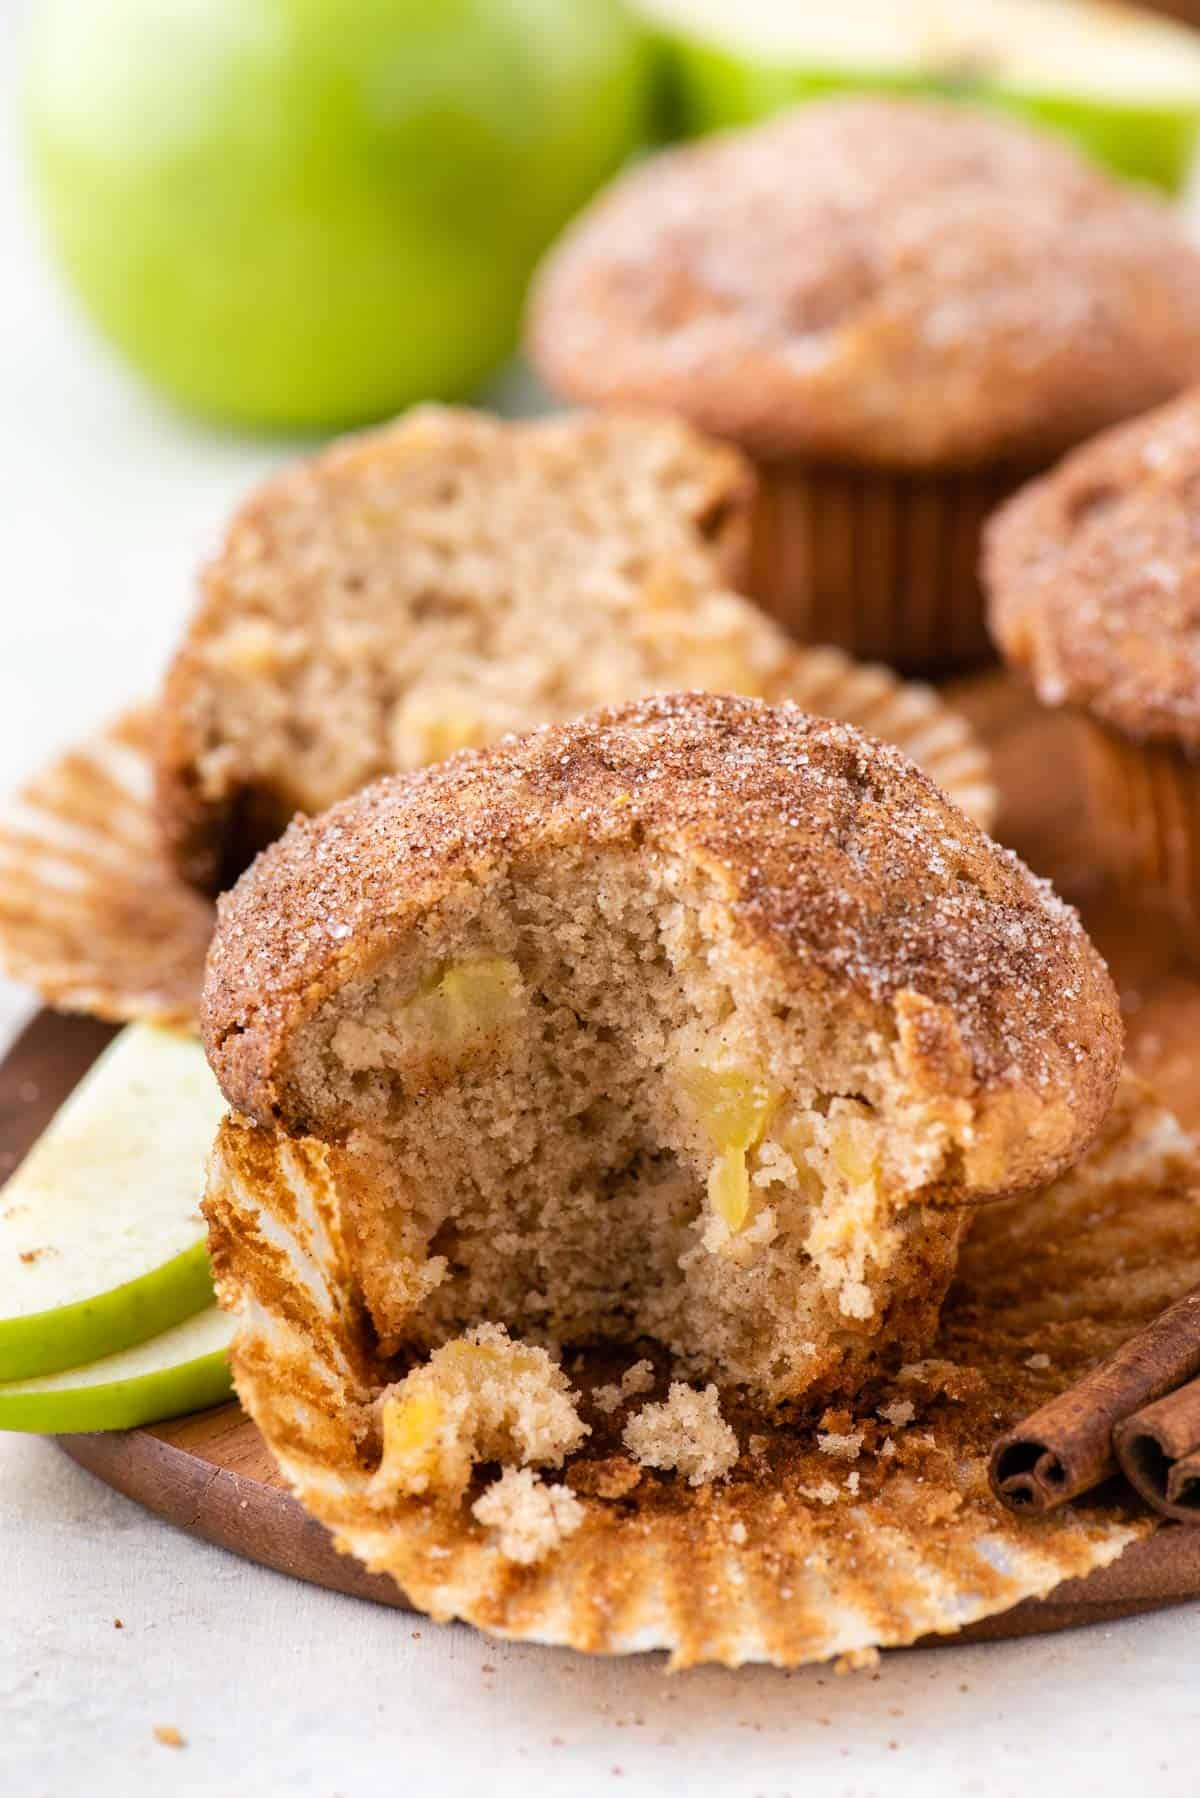 a partially eaten apple cinnamon muffin sitting inside its muffin paper surrounded by cinnamon sticks and green apple slices